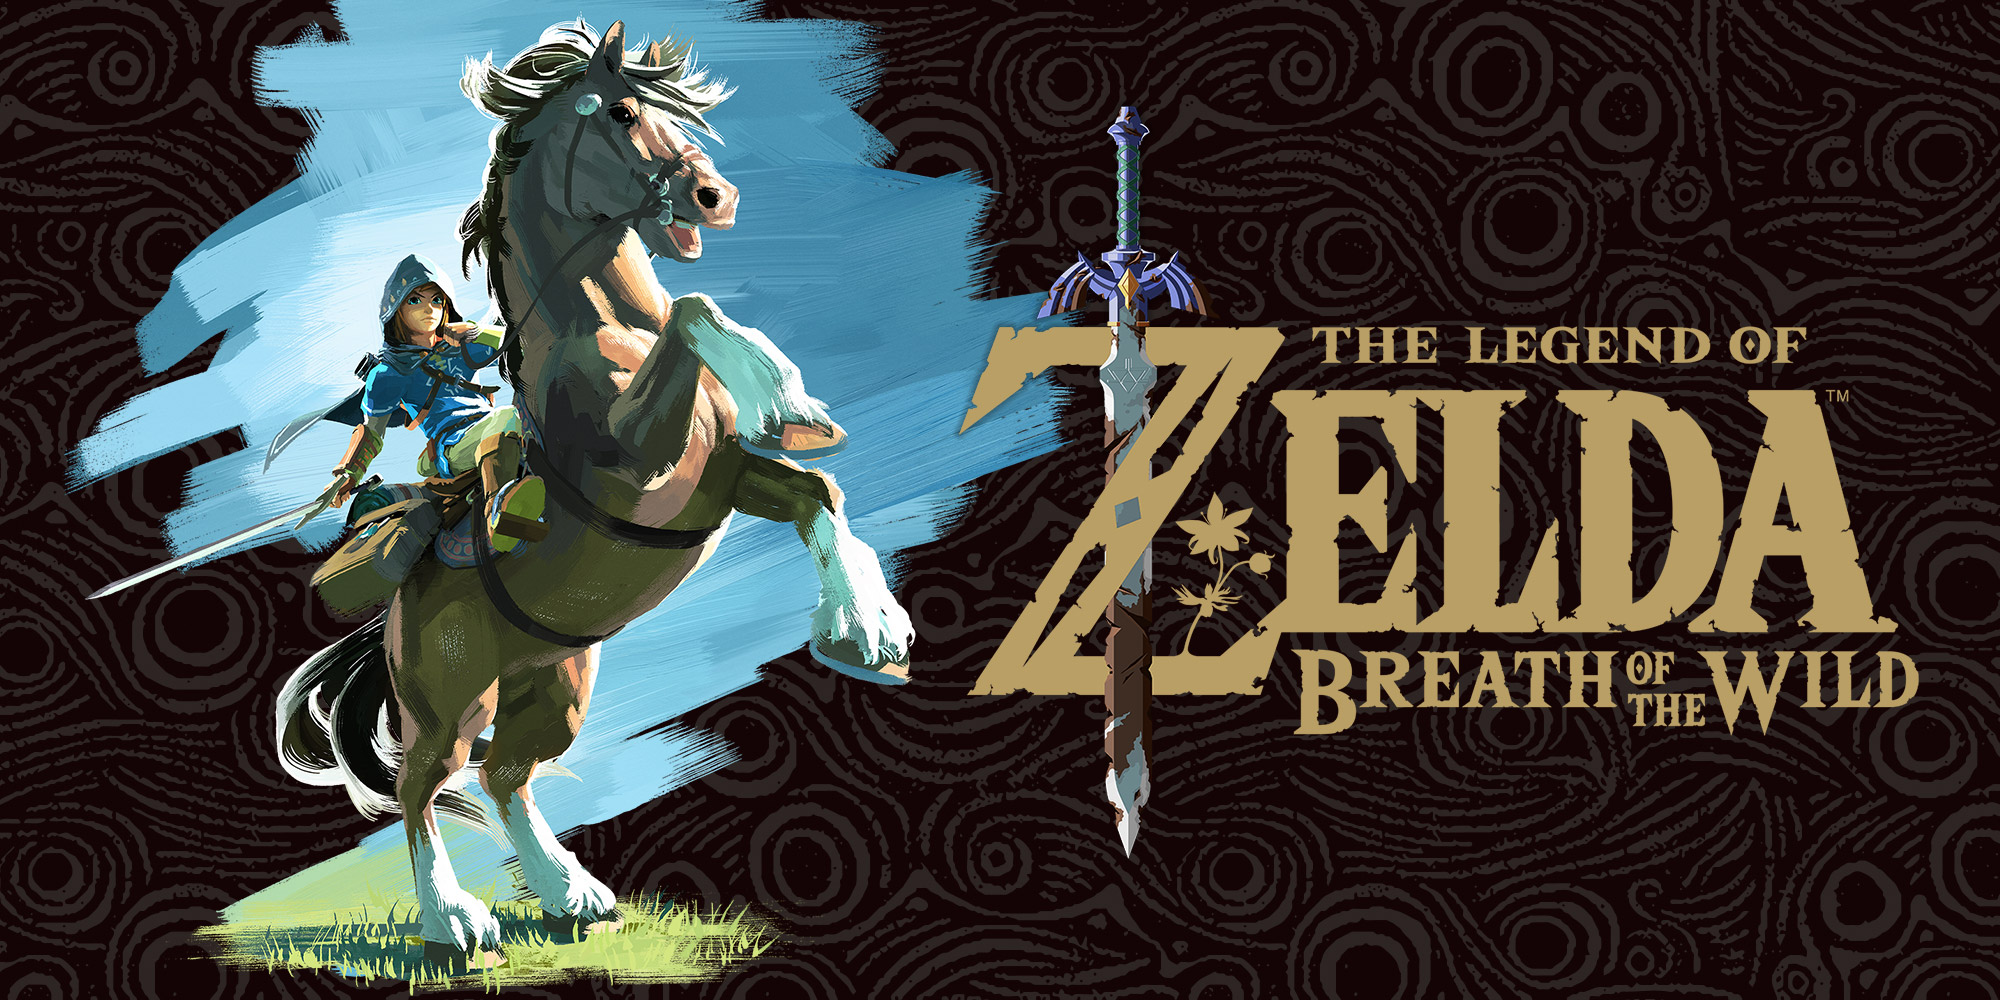 See what the new The Legend of Zelda amiibo can do in The Legend of Zelda: Breath of the Wild!